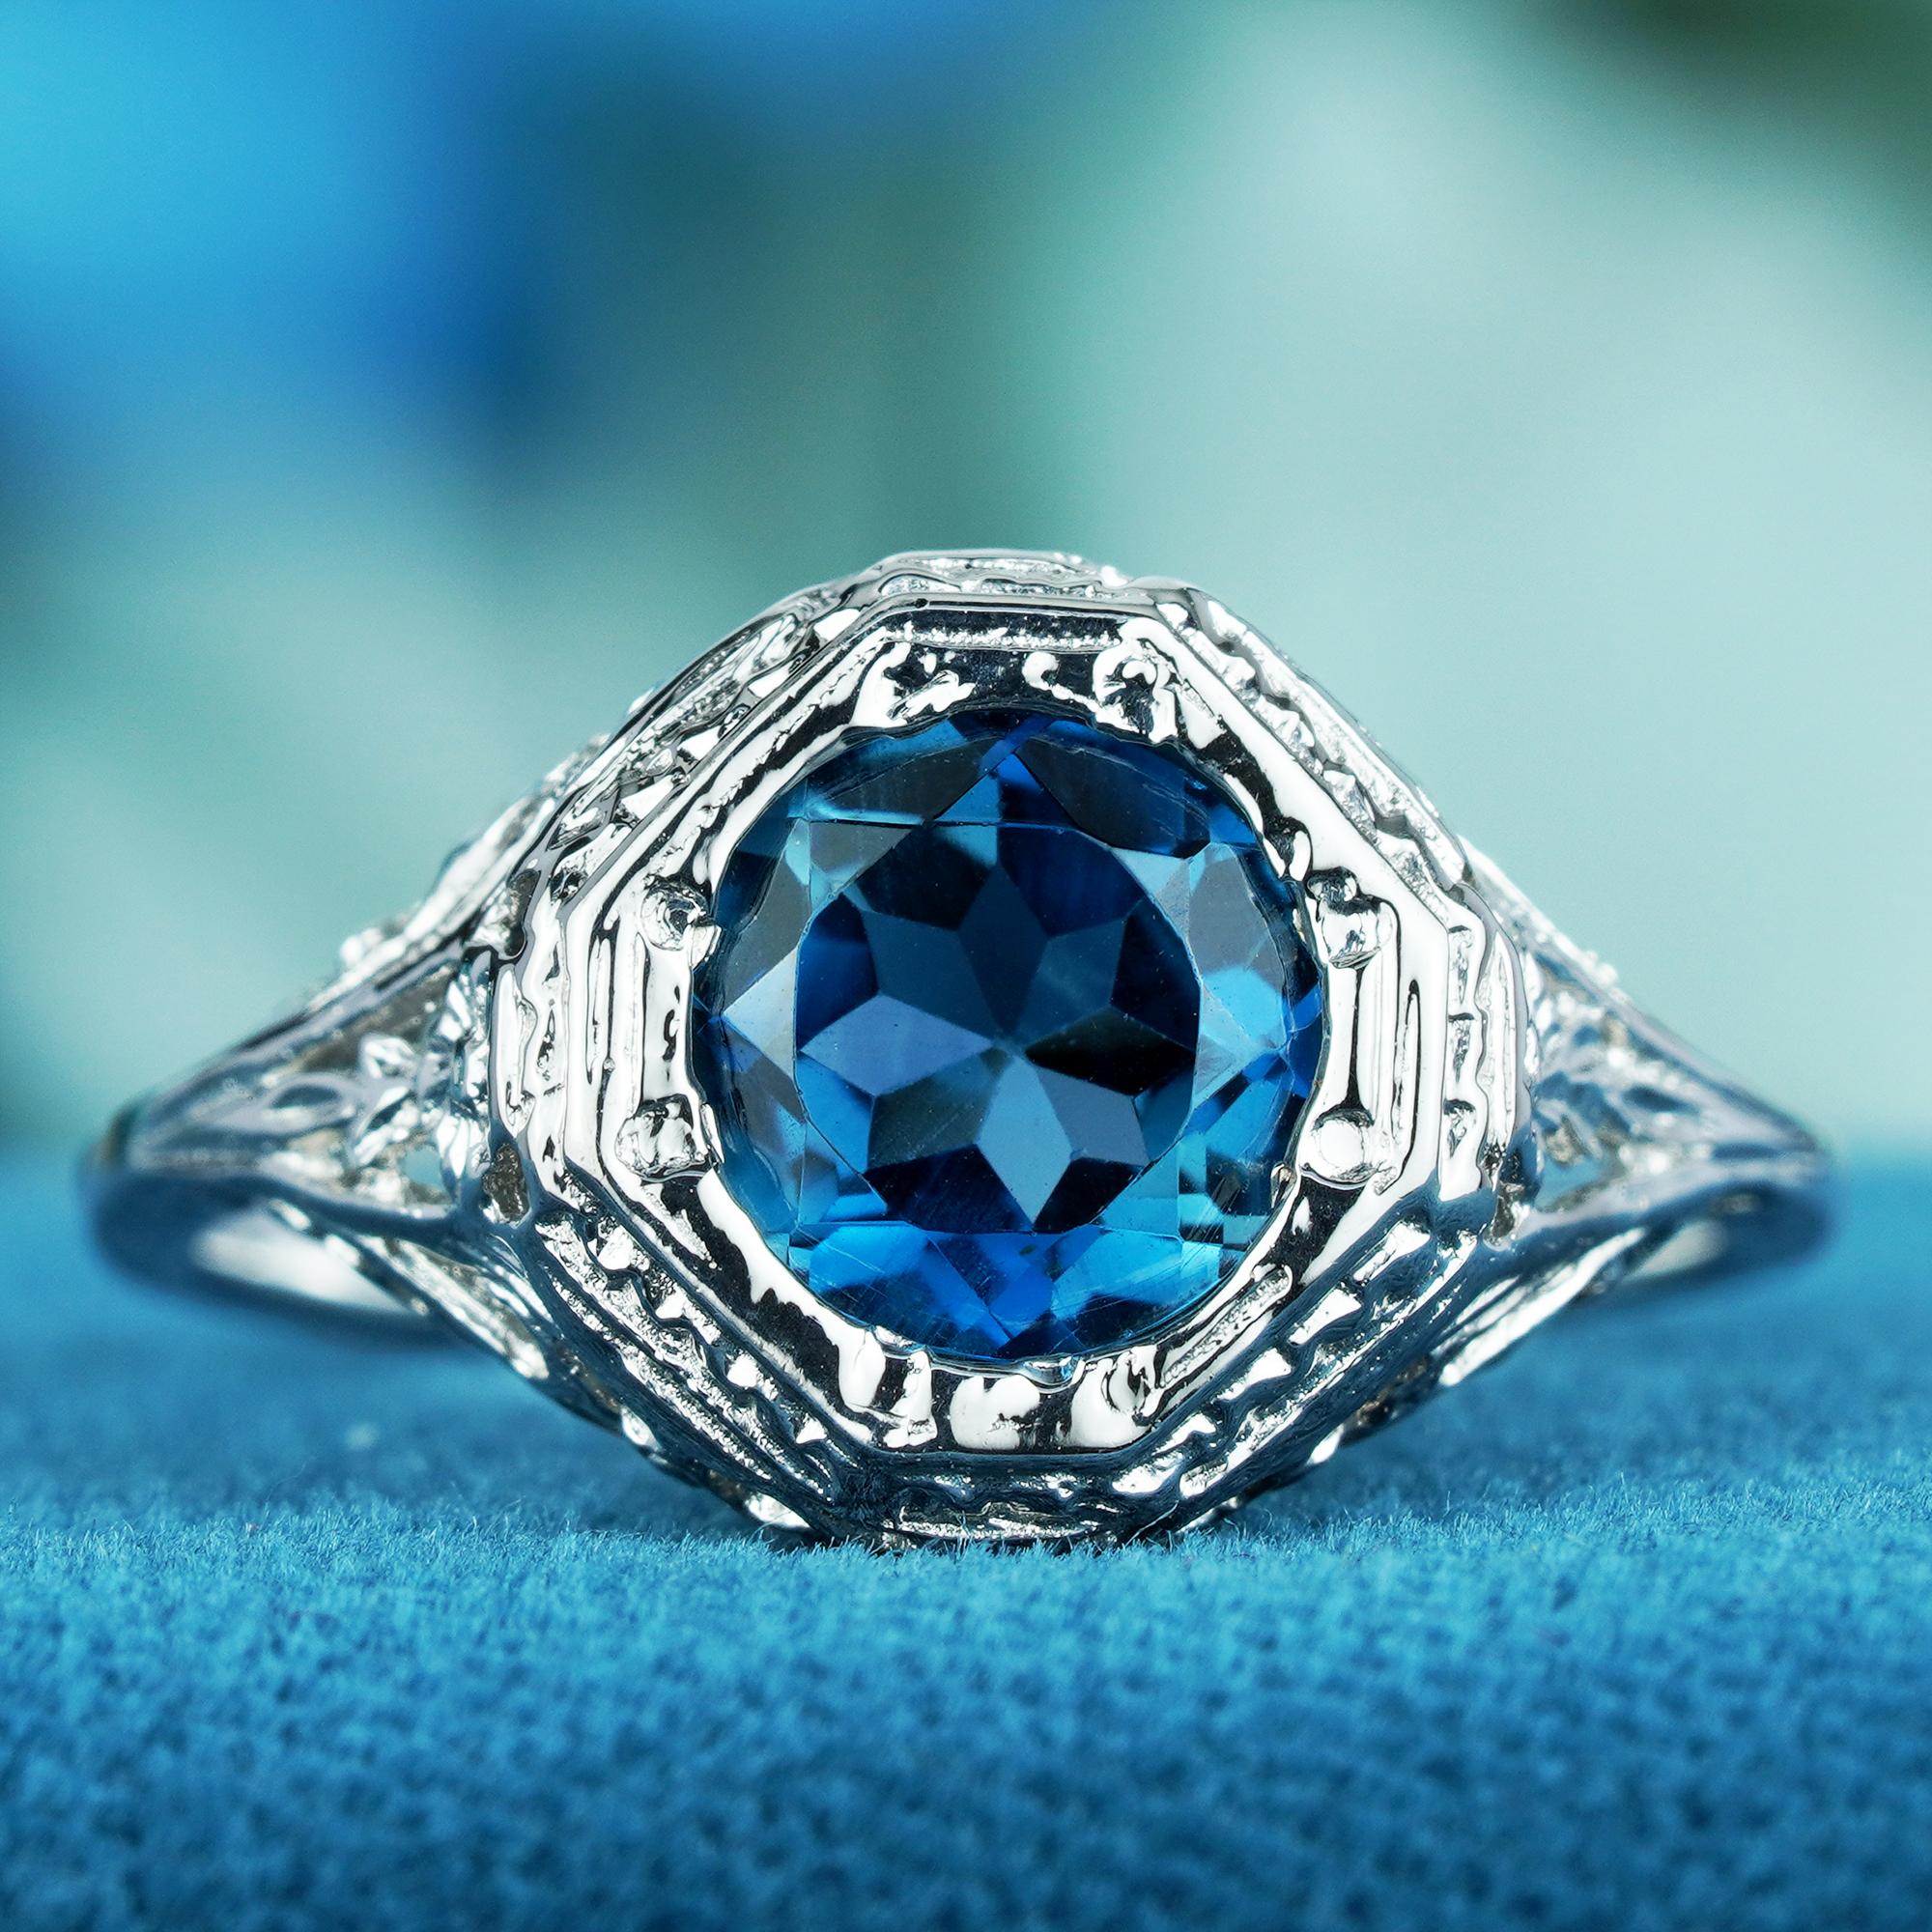 For Sale:  Natural London Blue Topaz Vintage Style Filigree Ring in Solid 9K White Gold 3